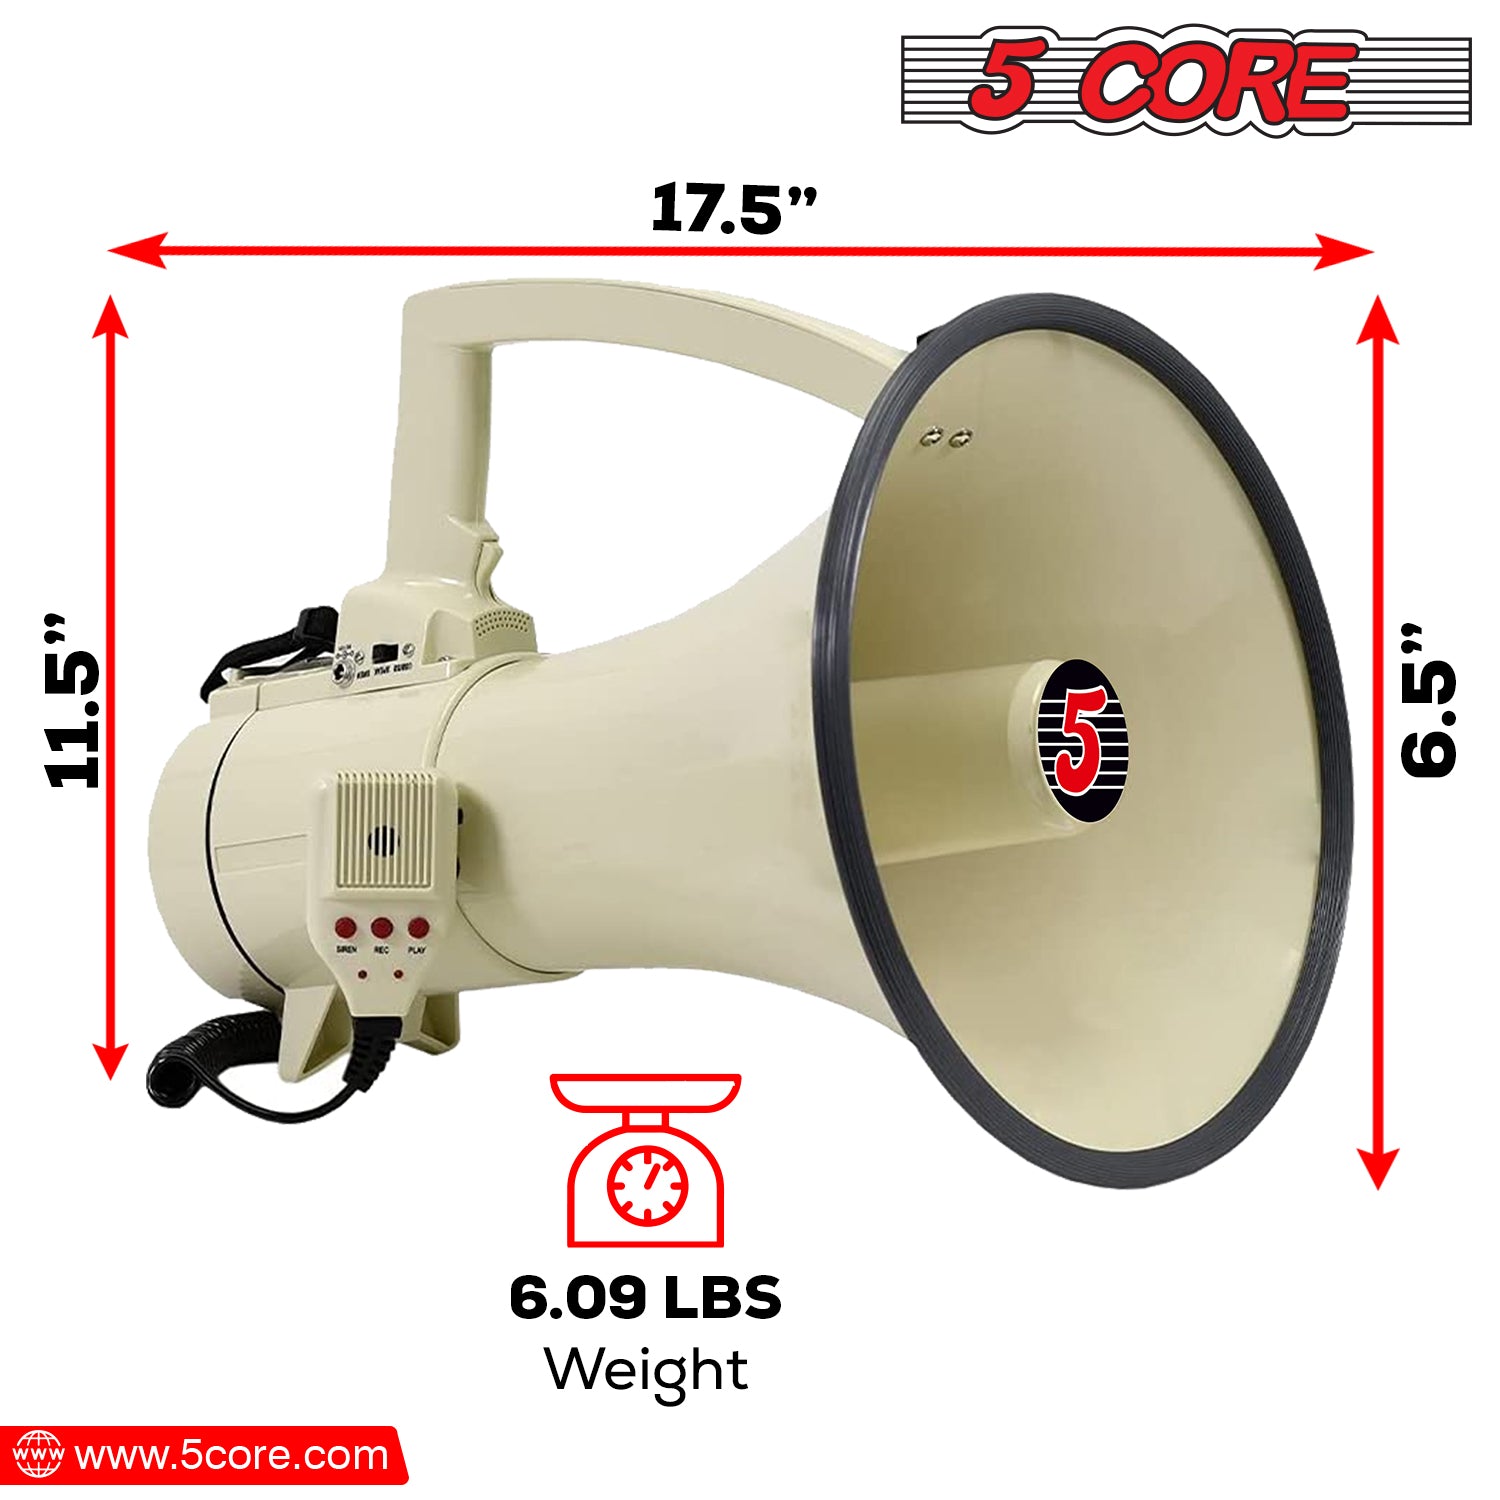 Robust Bull Horn Loud Speaker - 5 Core Megaphone Ideal for Clear Sound Projection